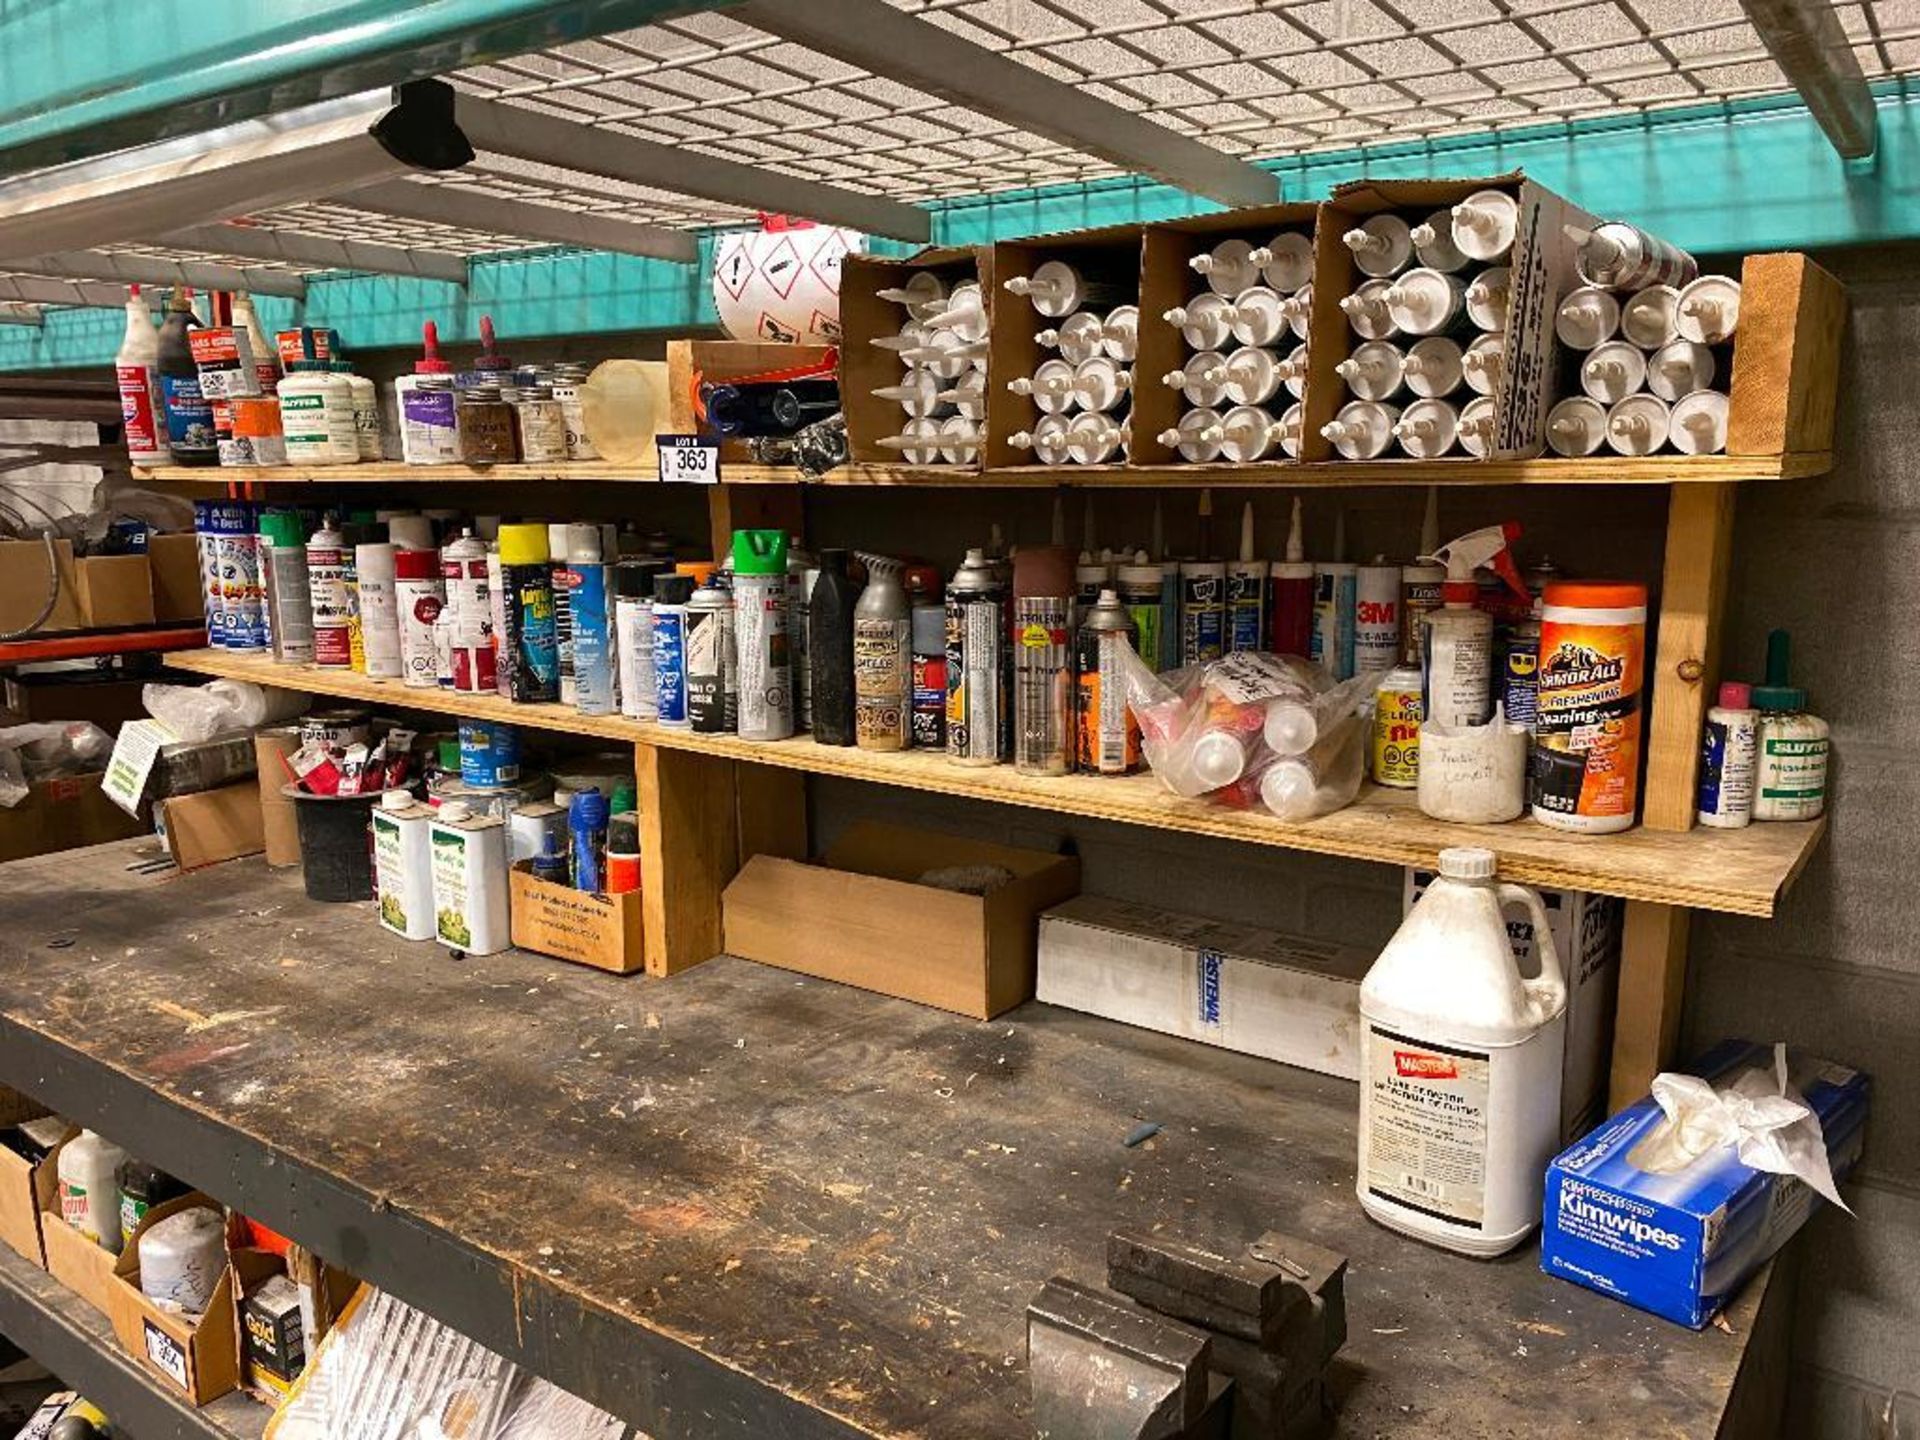 Contents of Shelf including Asst. Silicone, Asst. Aerosol Products, Turpentine, Adhesive, Caulking G